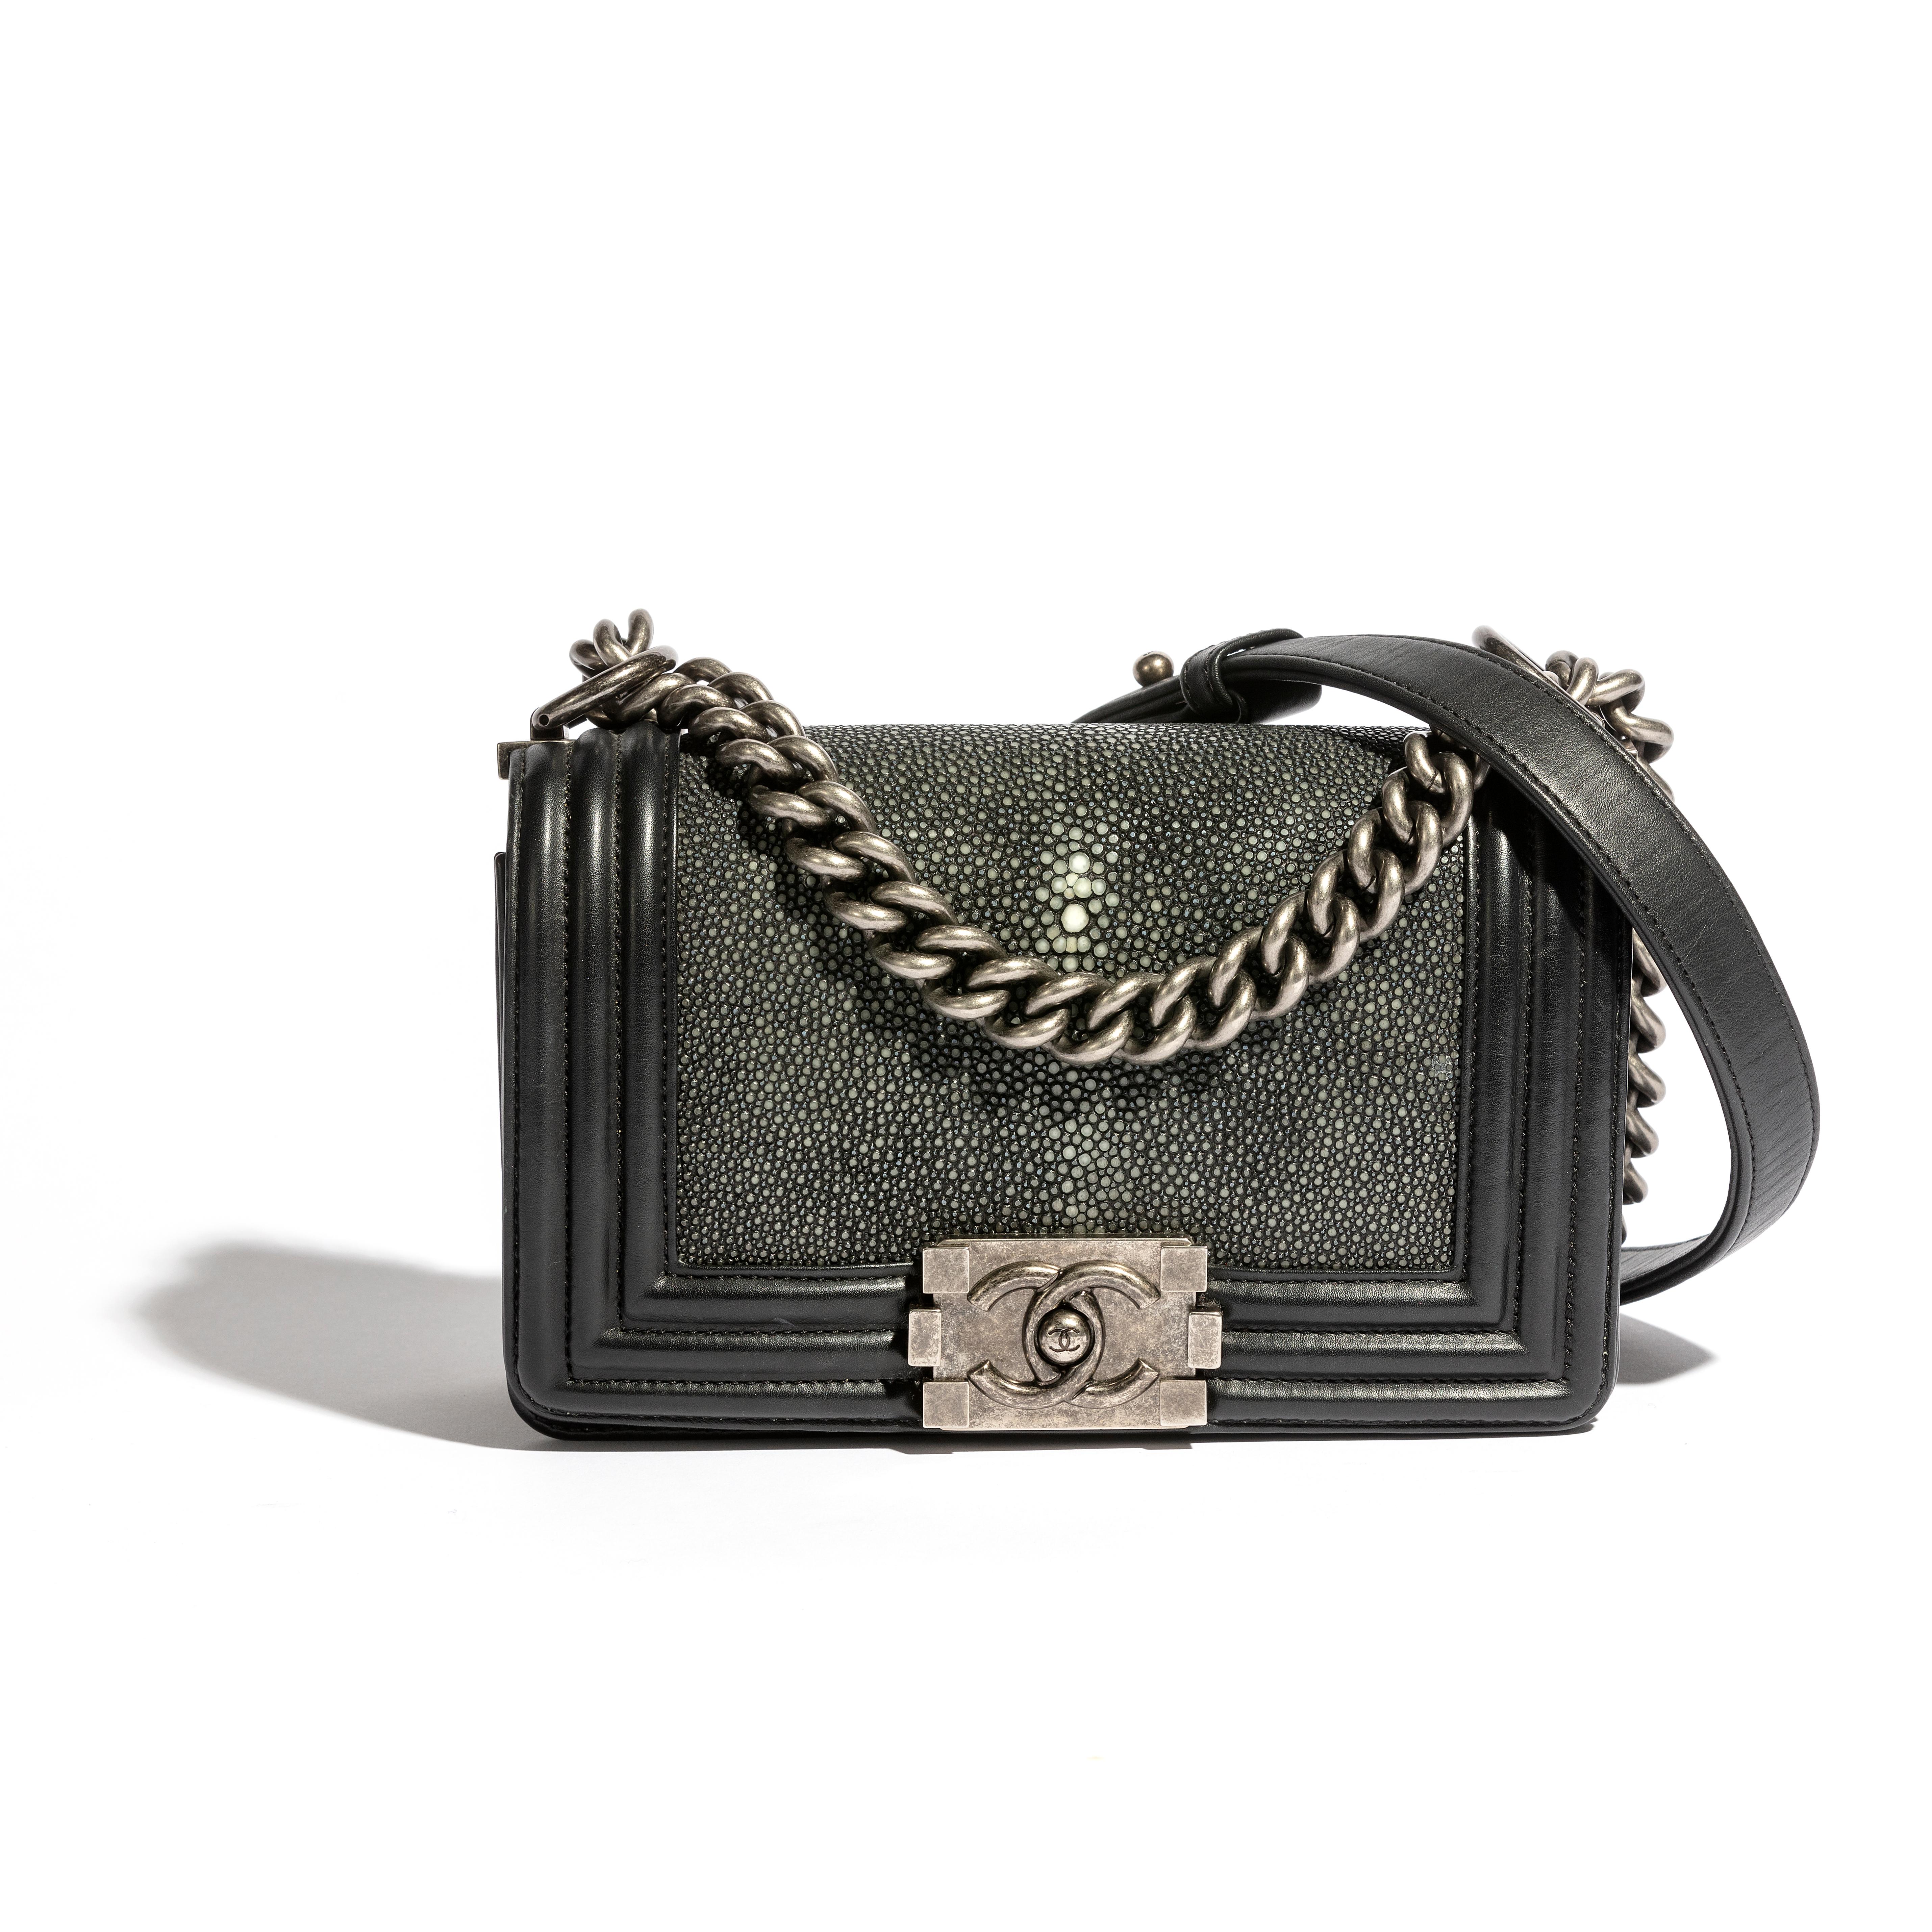 This Chanel Mini Boy Flap is one of the iconic designs created by Karl Lagerfeld to pay homage to Gabrielle Chanel's first love, Boy Chapel. With a rectangular shape, a large chain, and graphic clasps with its iconic CC, it's a Chanel classic. This